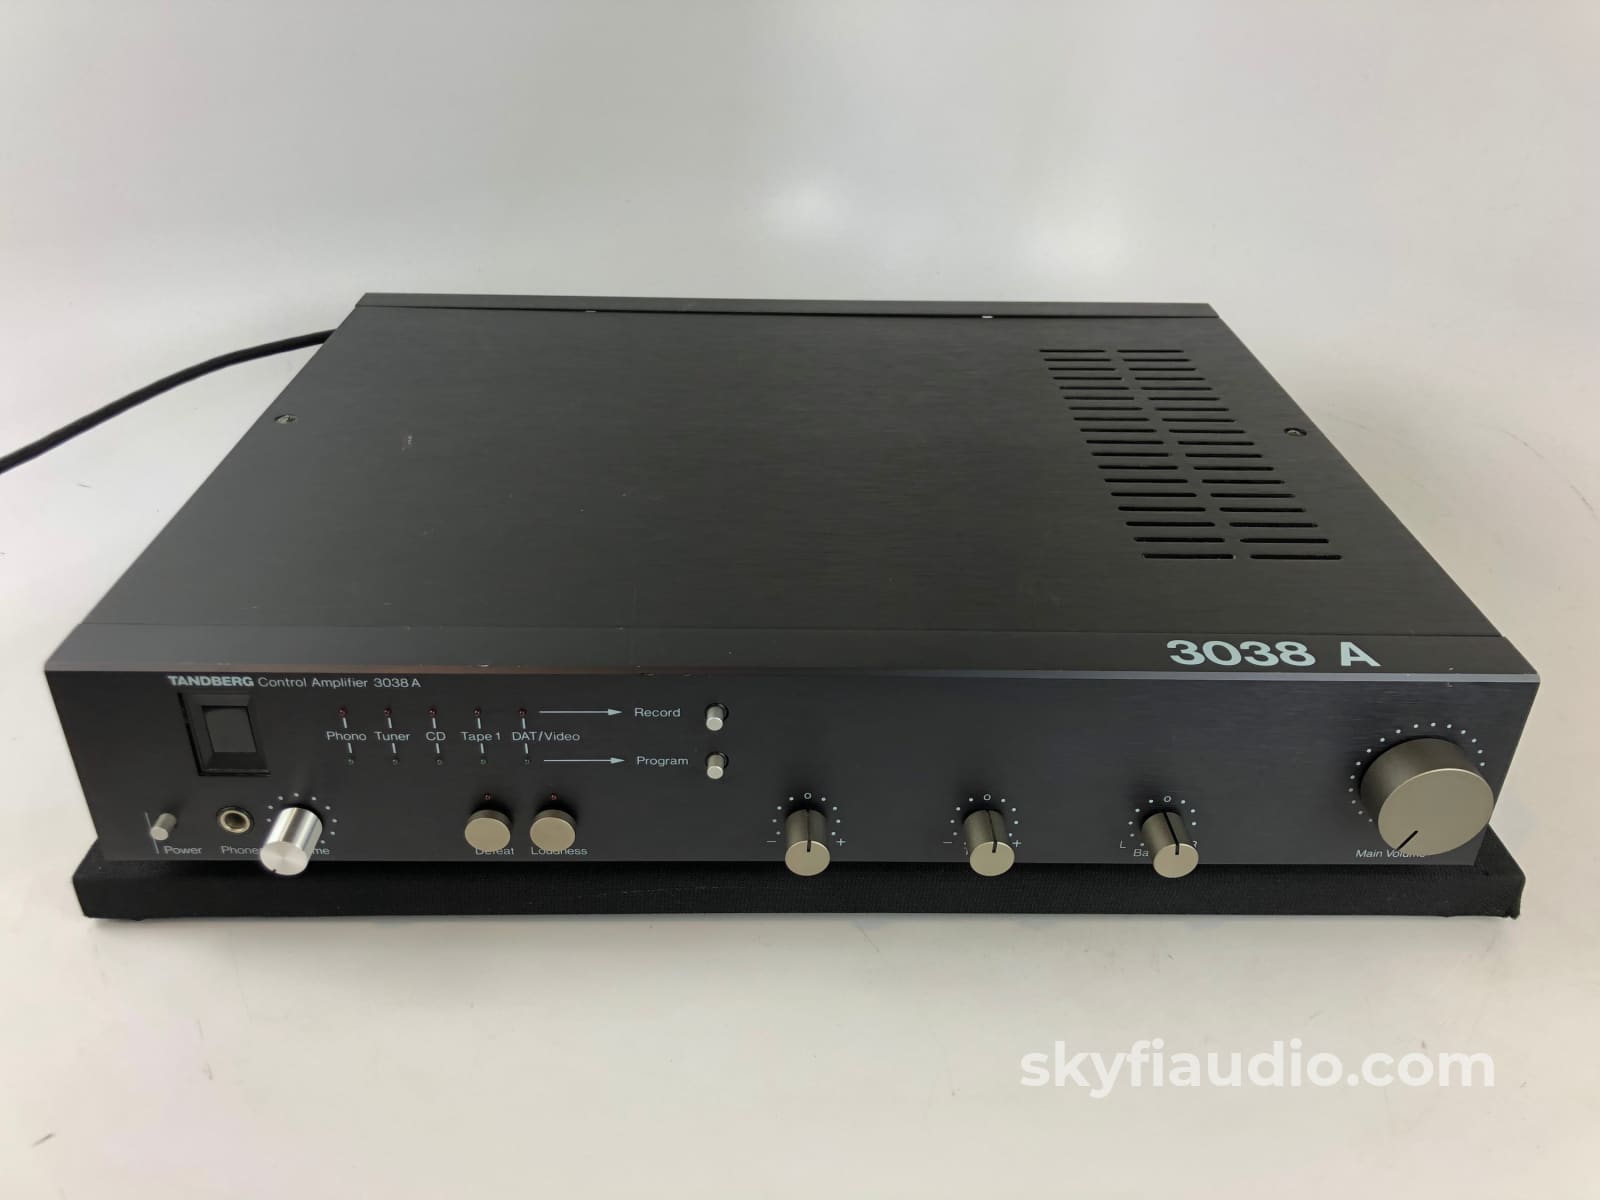 Tandberg Tca-3038A Solid State Preamp With Phono Made In Norway Preamplifier